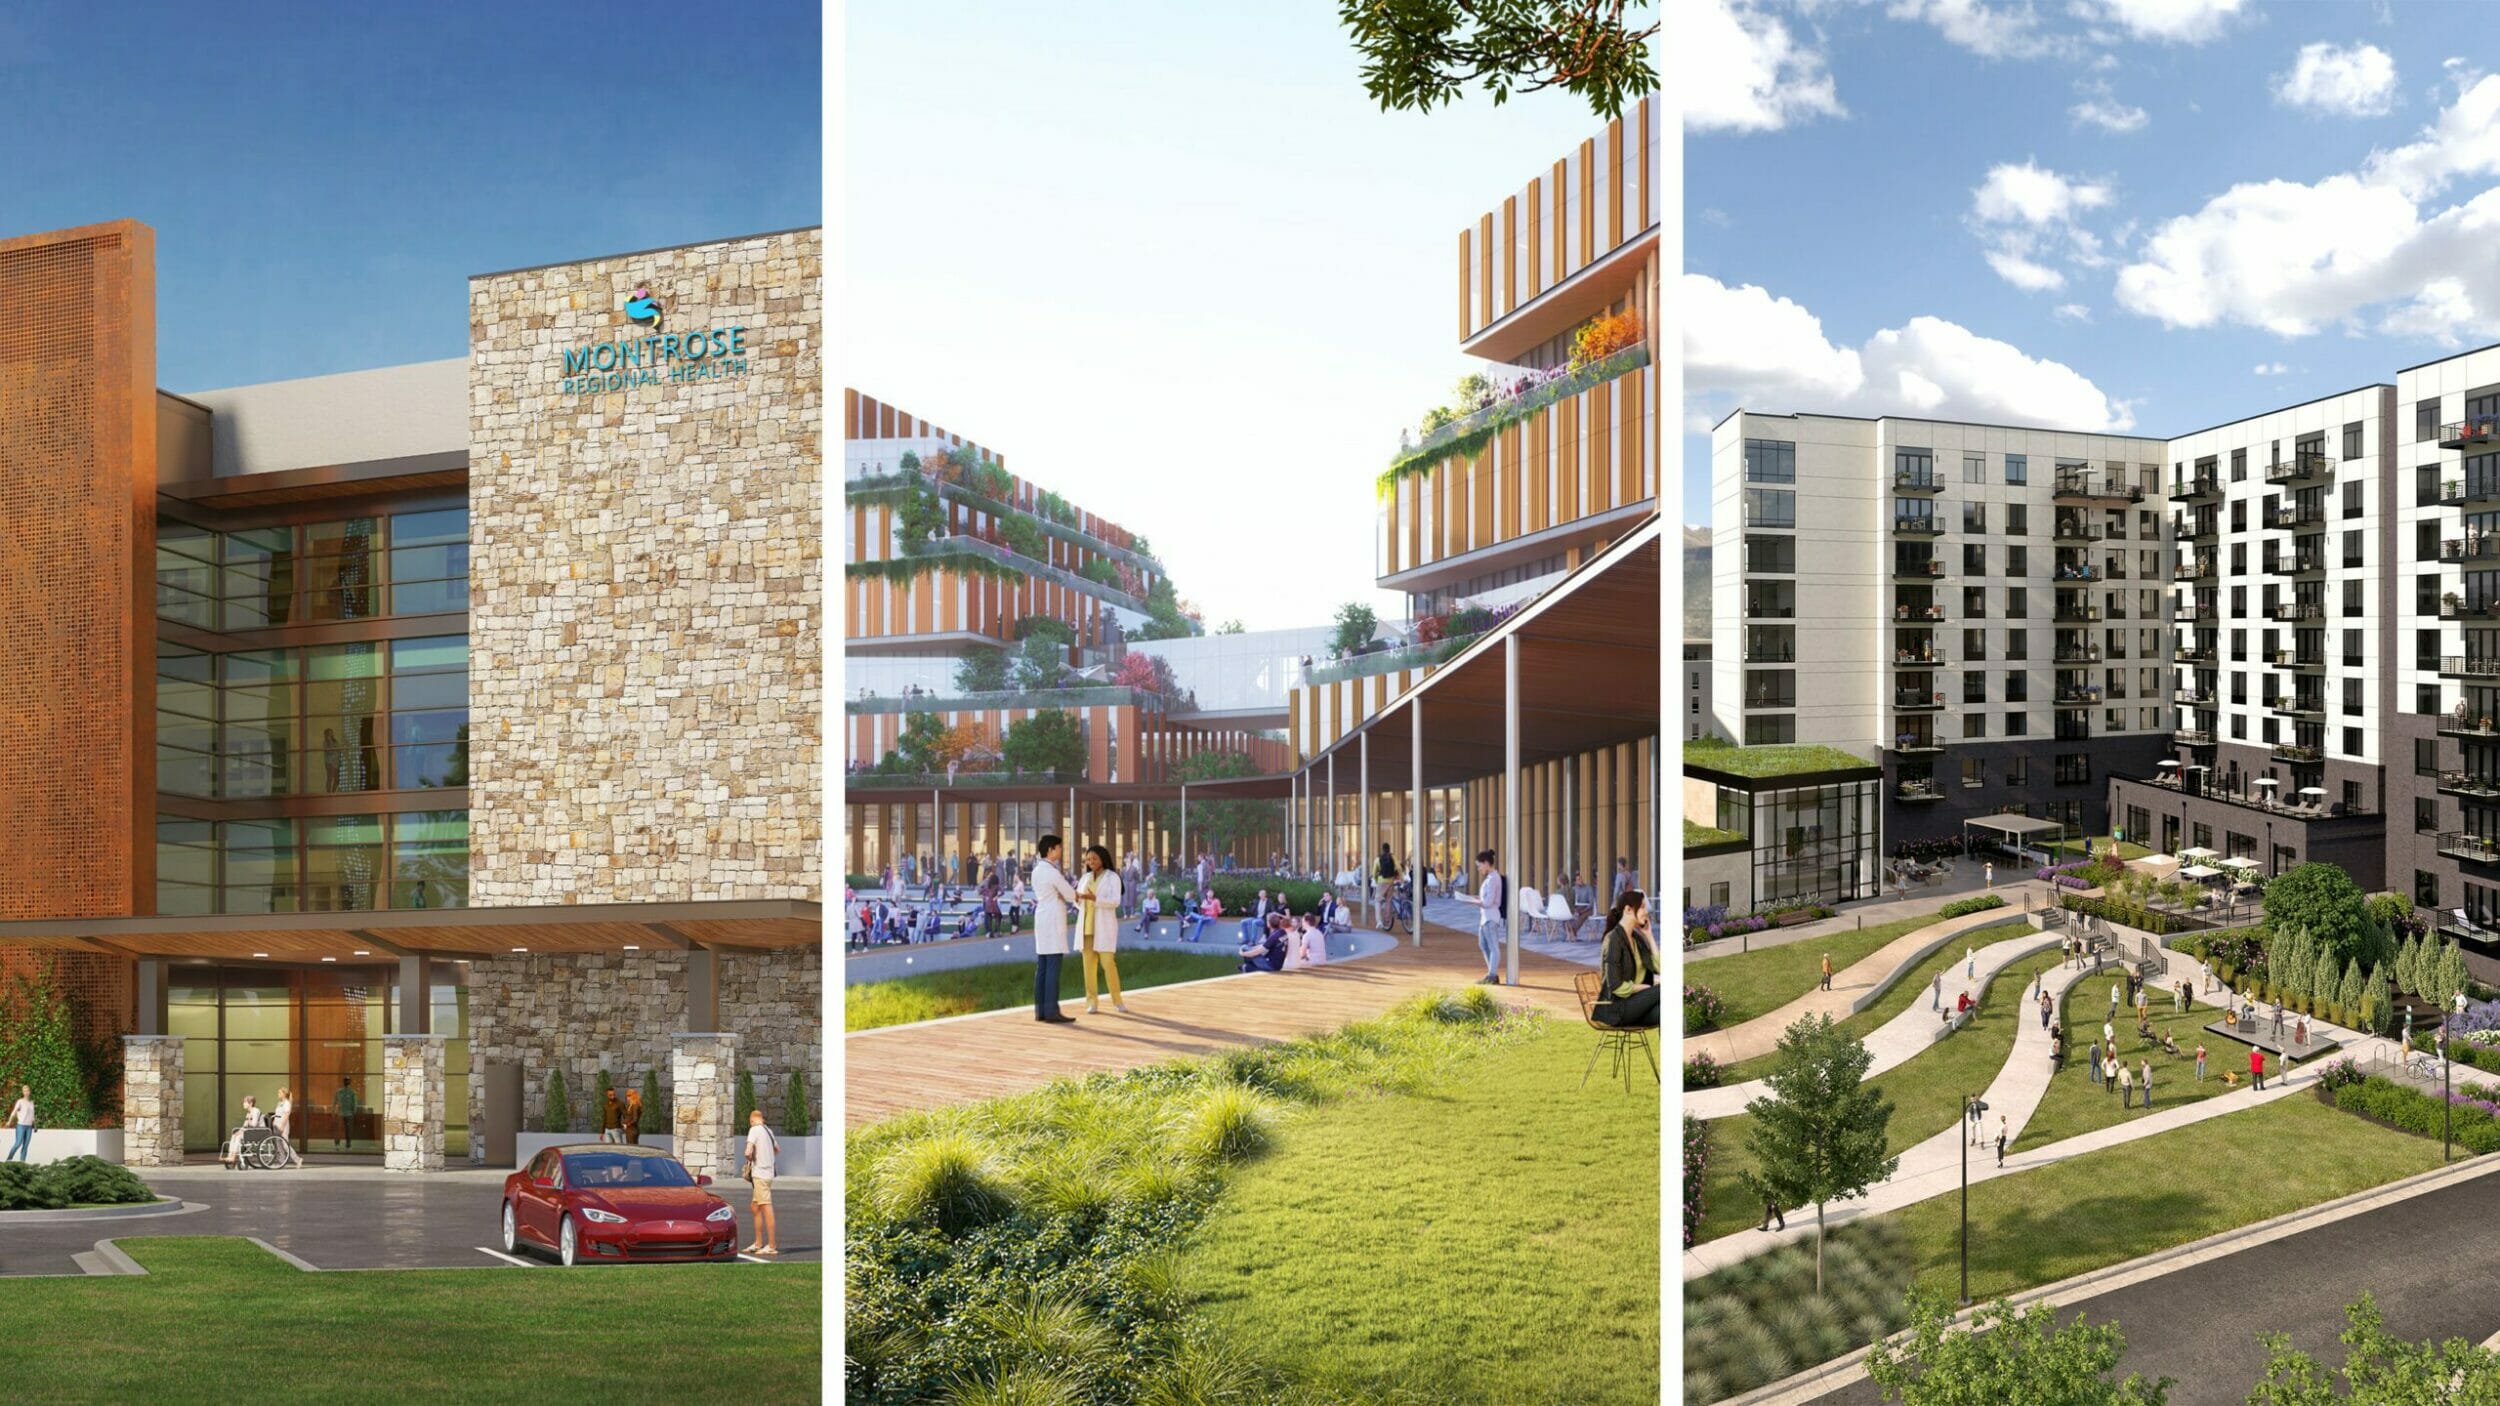 Three separate building renderings of Montrose Regional Health, Glo Park, and Lone Tree combined to be featured in one image